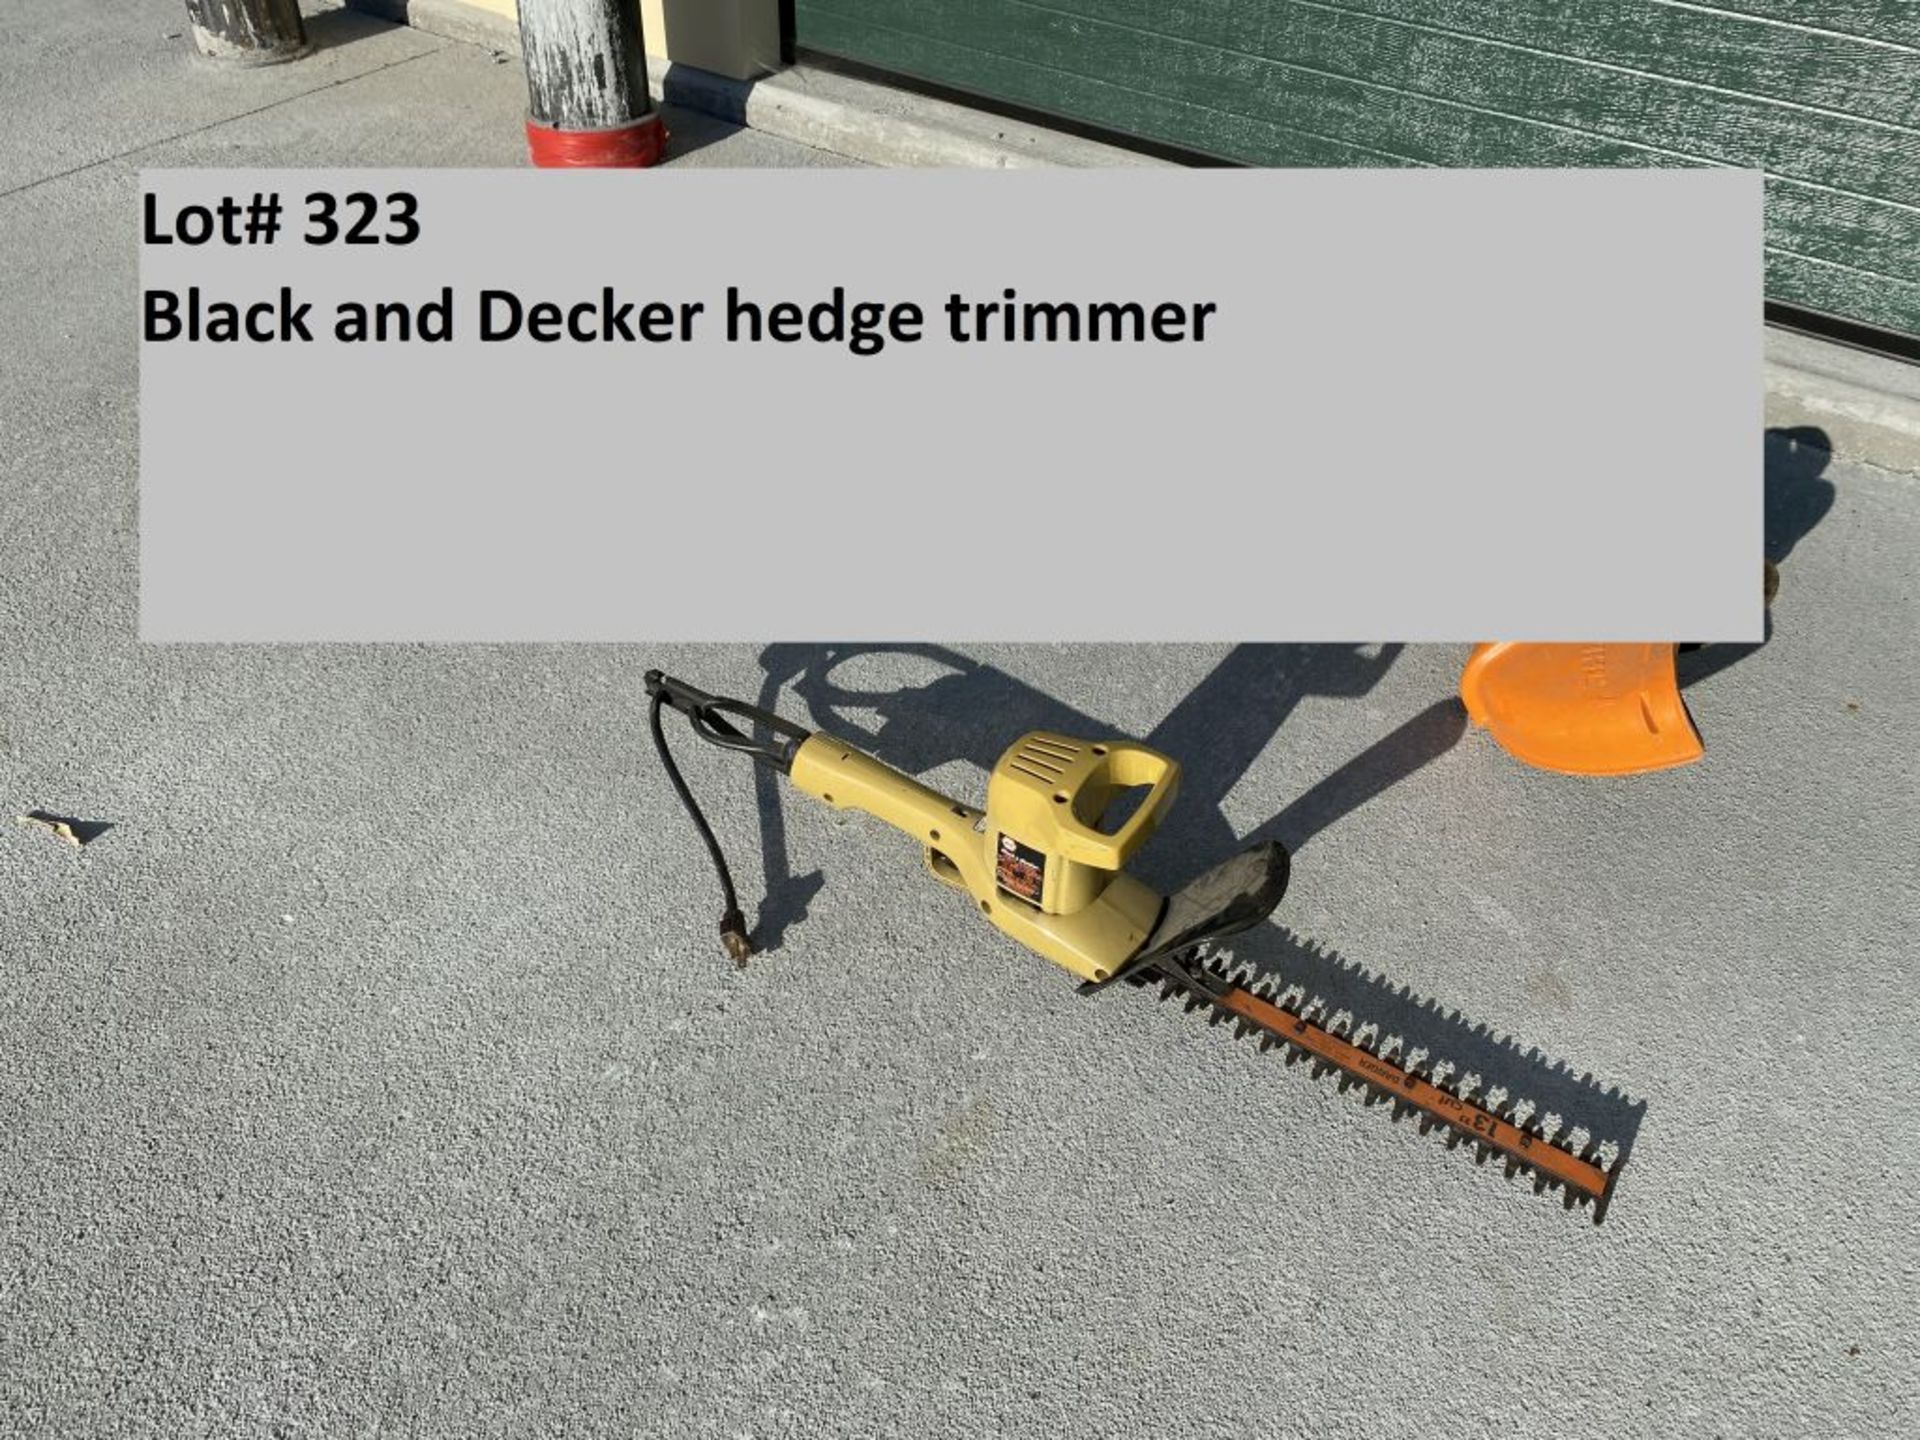 Black & Decker hedge trimmer model 8115, 120 v., 13" capacity. (LOCATED AT HILPIPRE AUCTION CO.